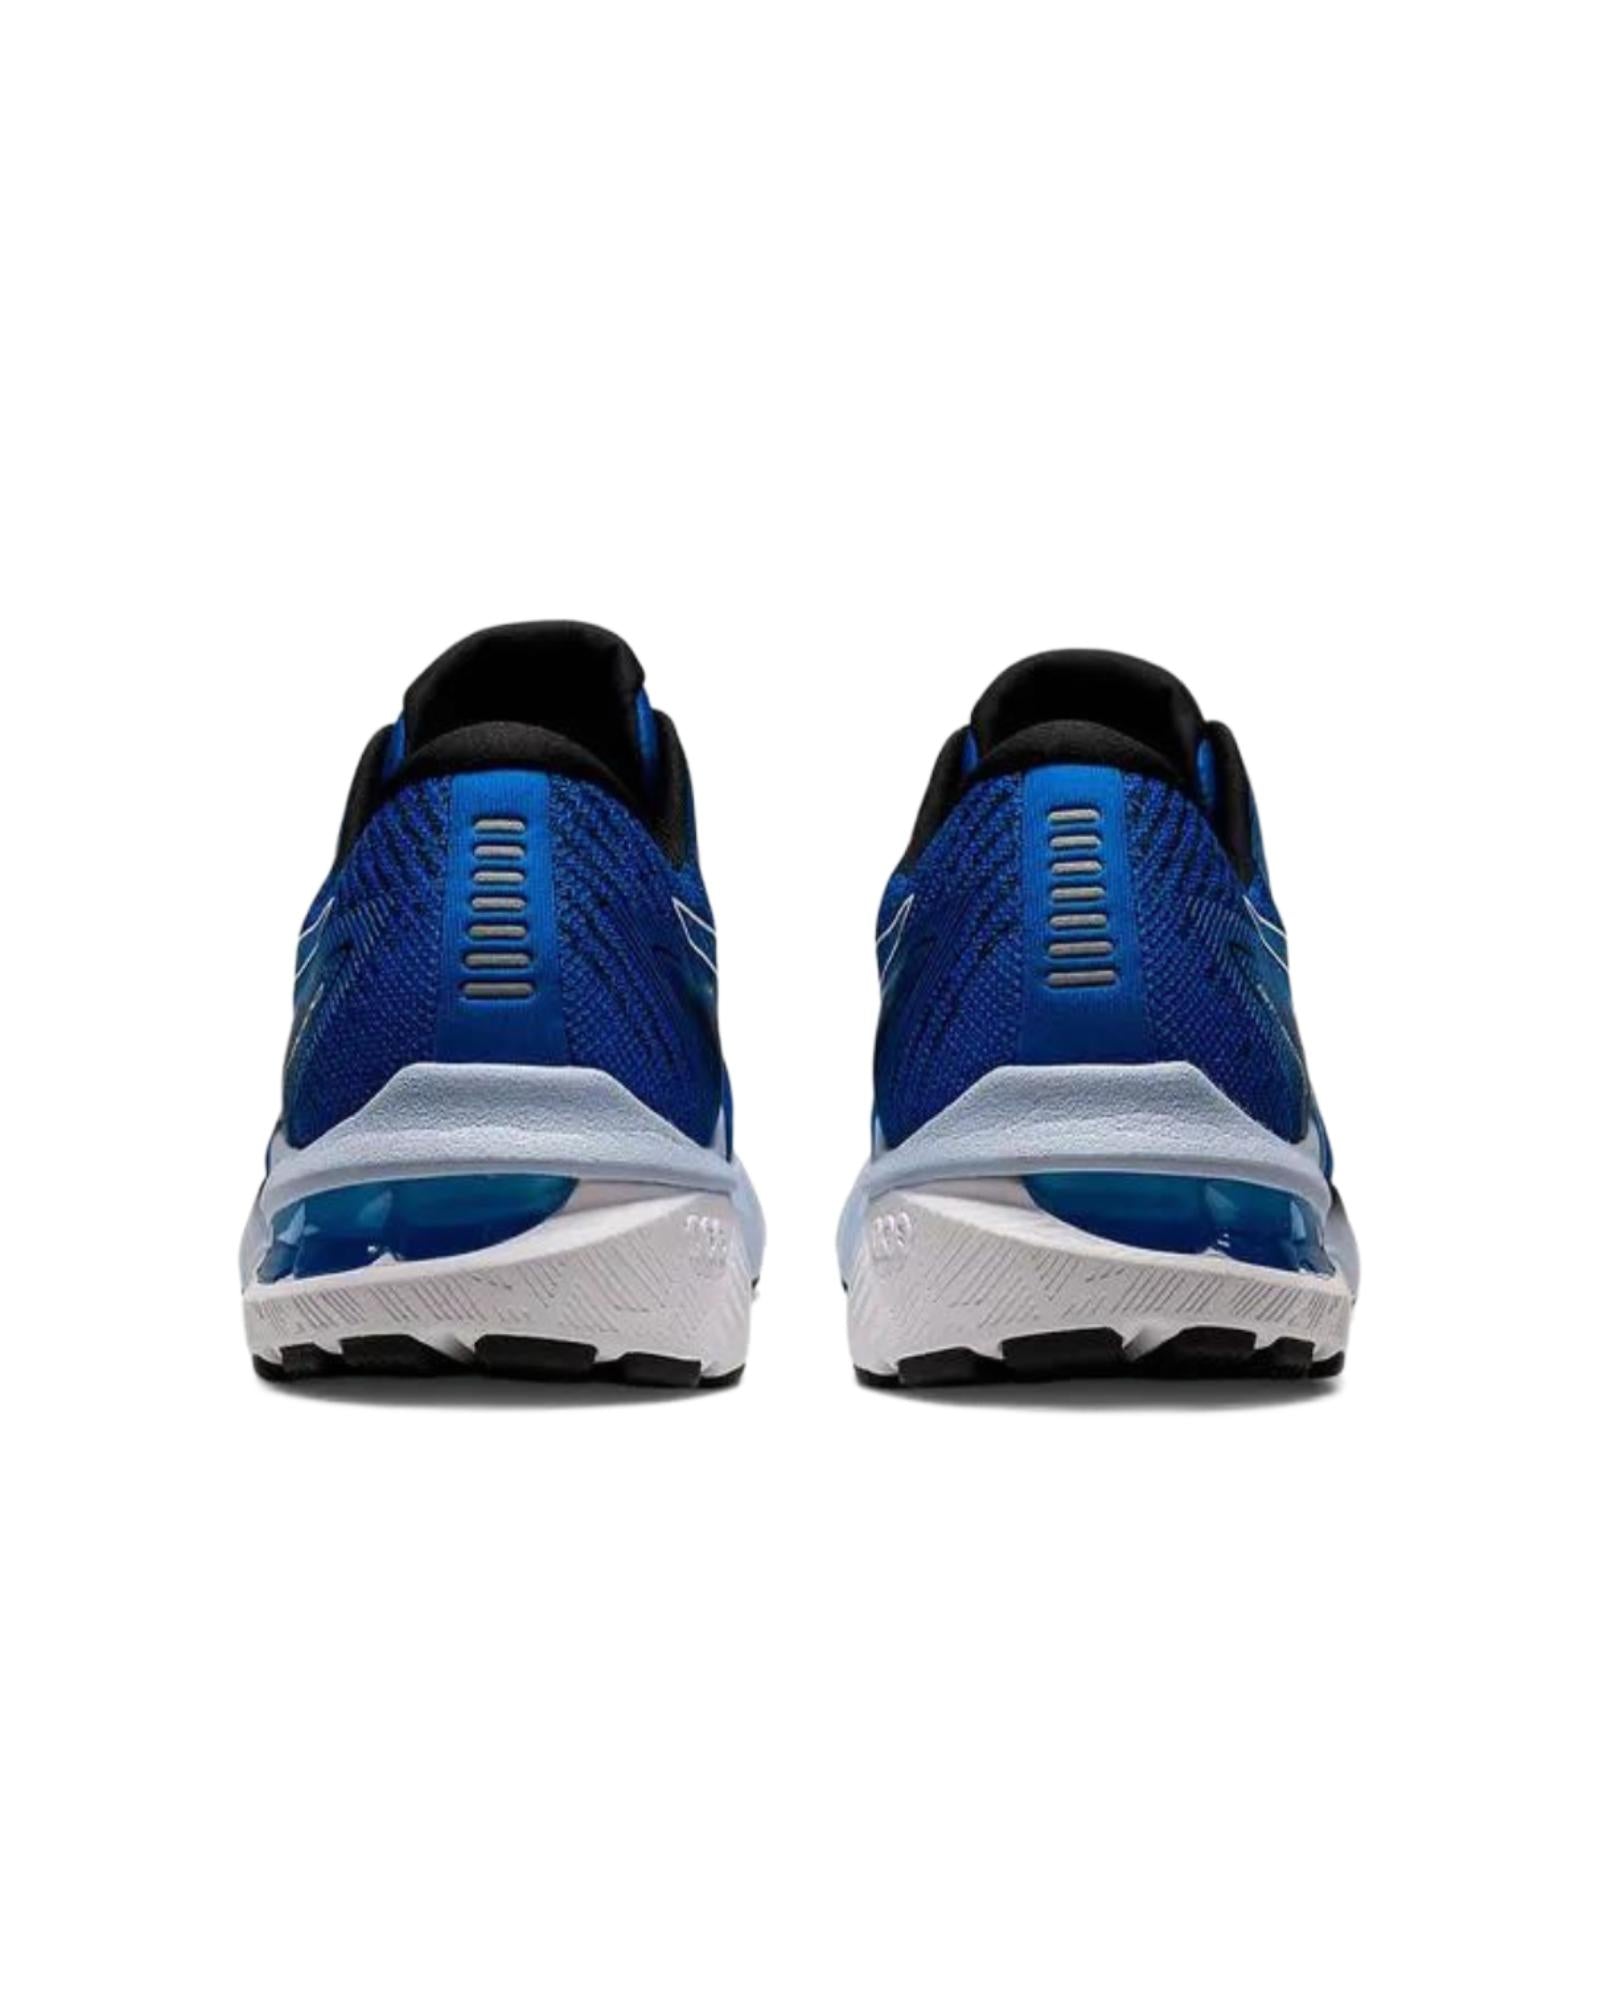 Stable and Responsive Running Shoe - 14 US